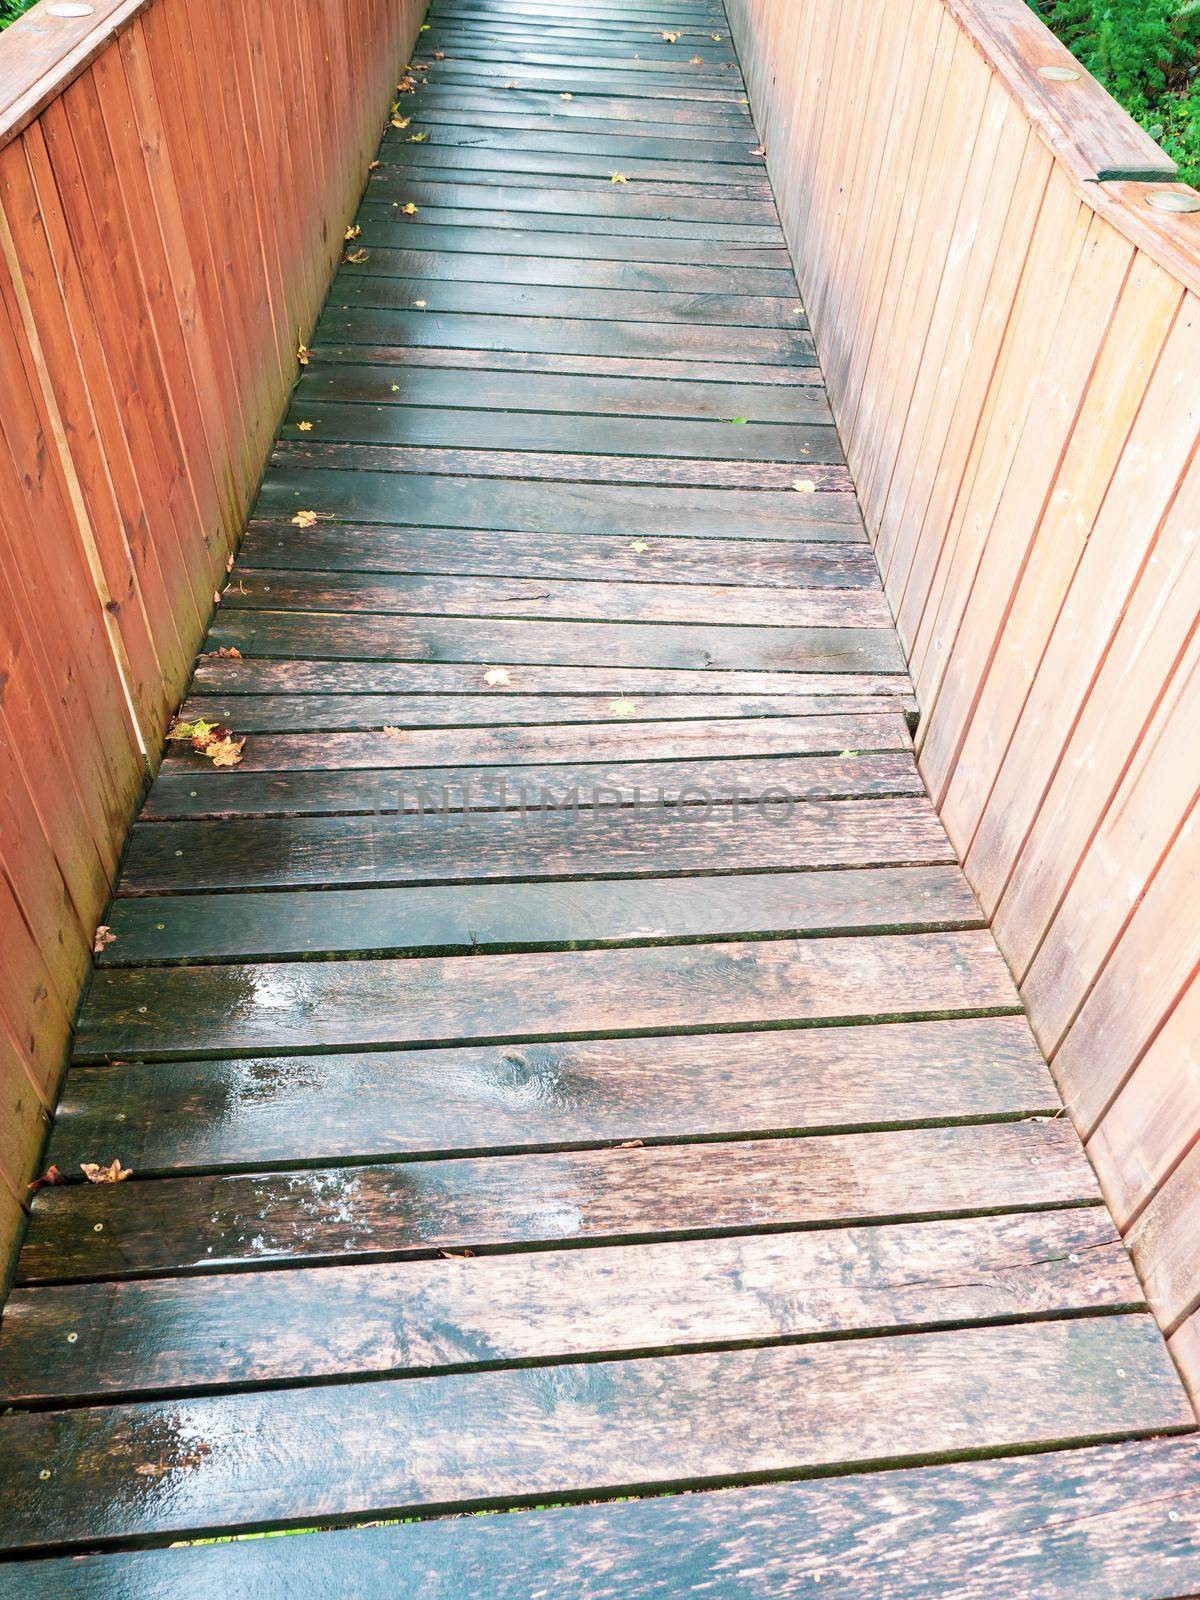 Wet wooden planks of path for wheelchairs, another castle entrance. Barrier free path for visitors.